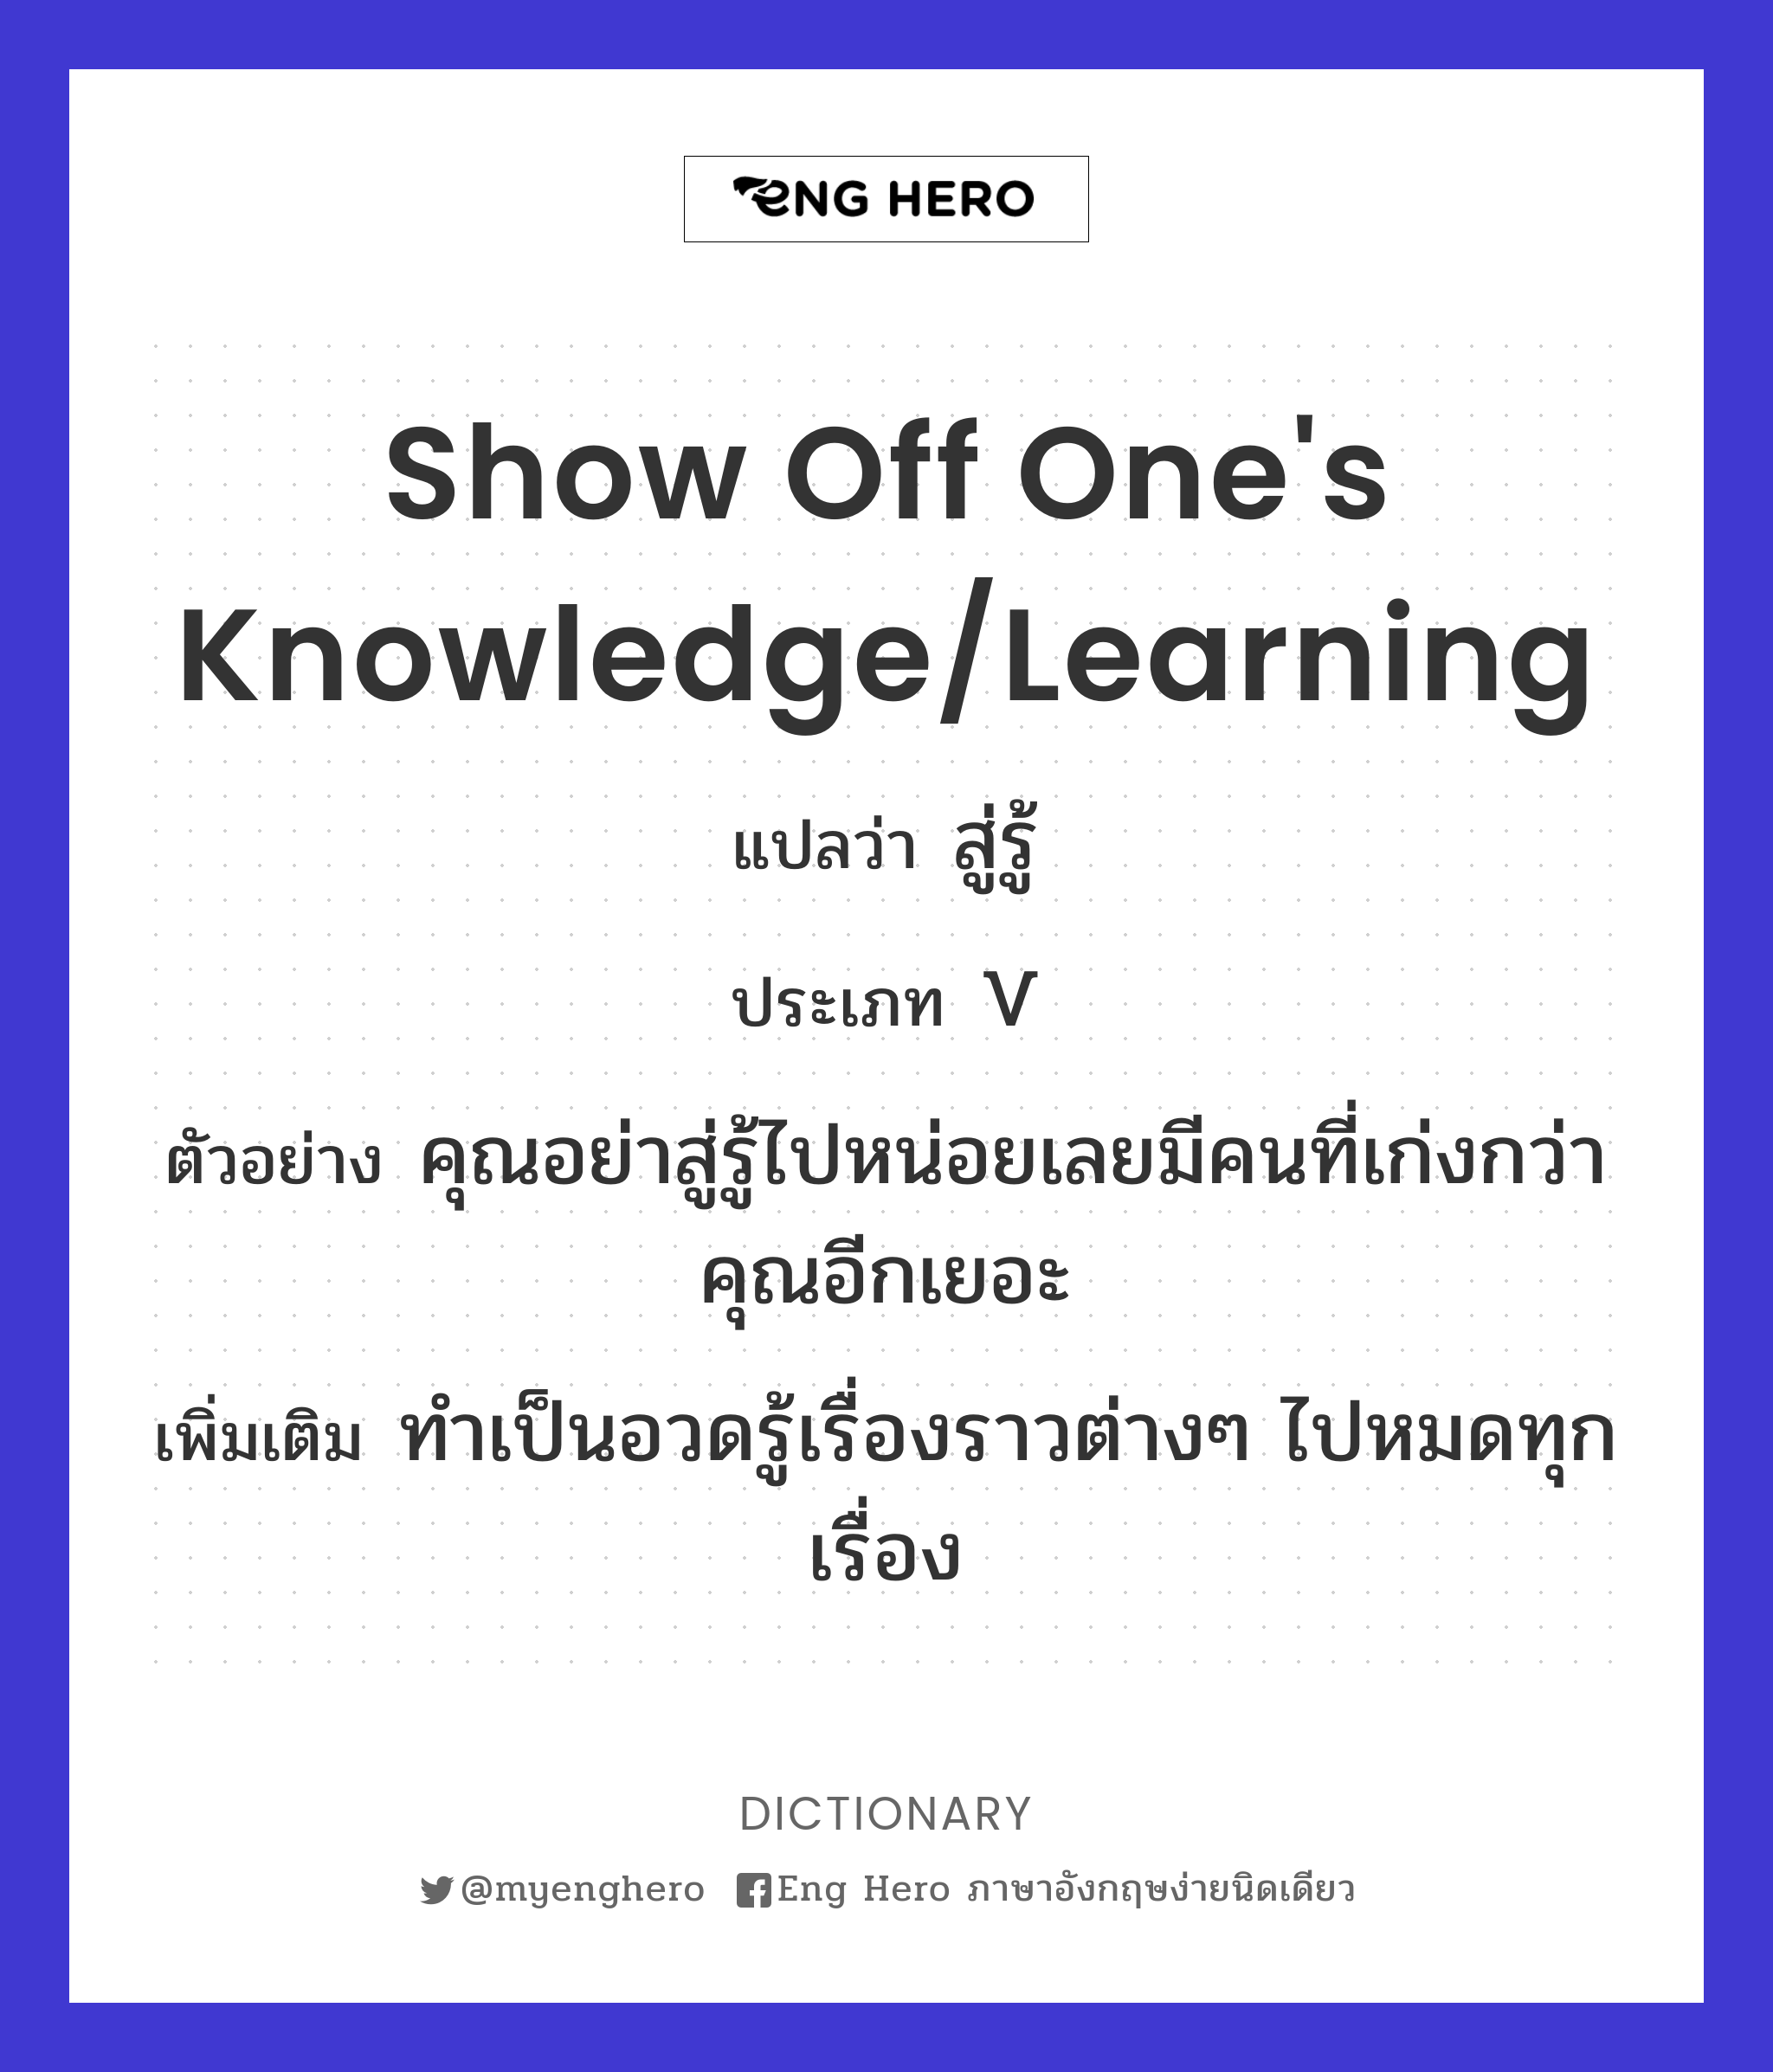 show off one's knowledge/learning